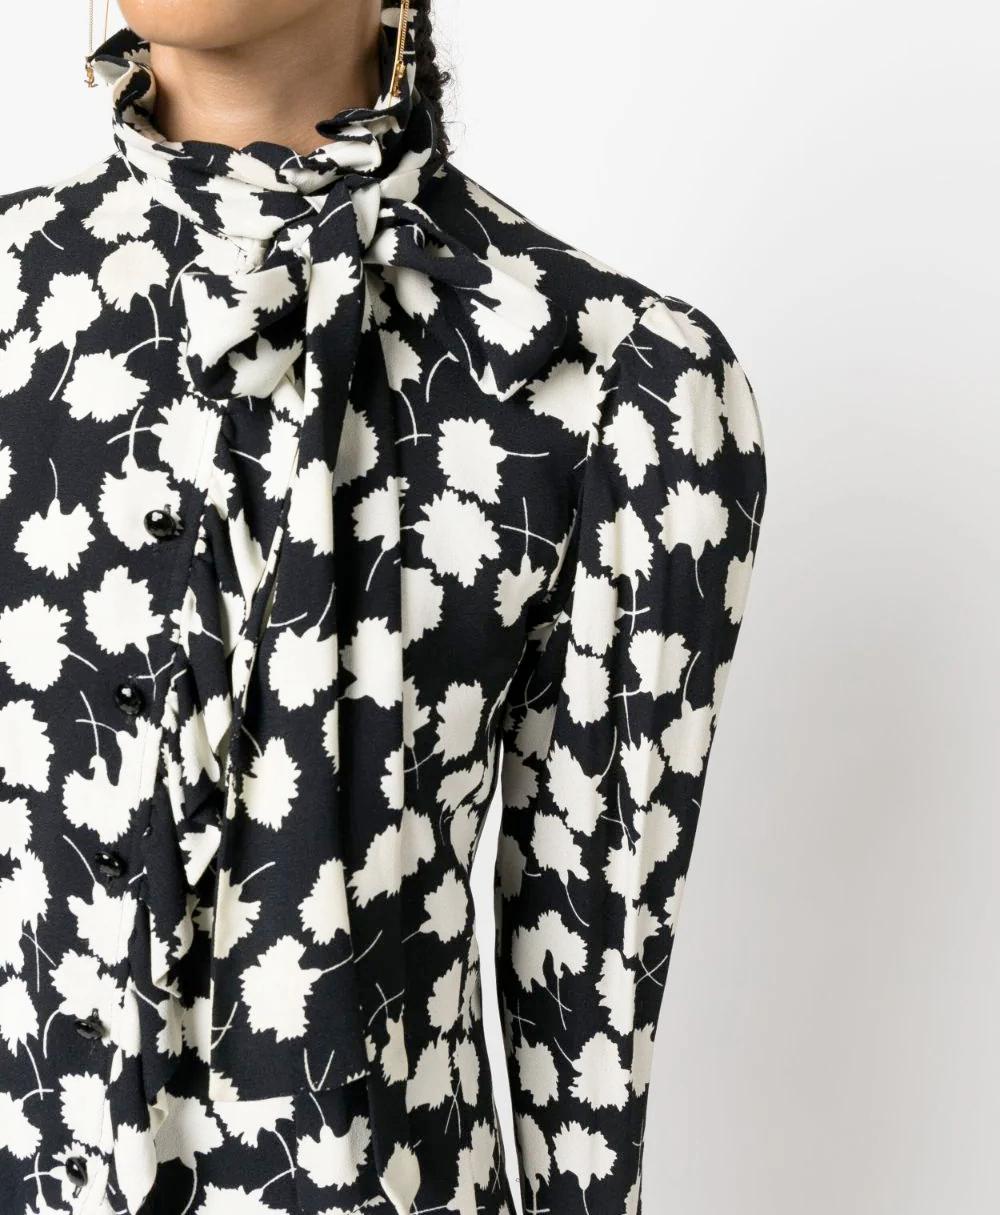 1978 Yves Saint Laurent YSL Iconic Flower Printed Jacket For Sale 1